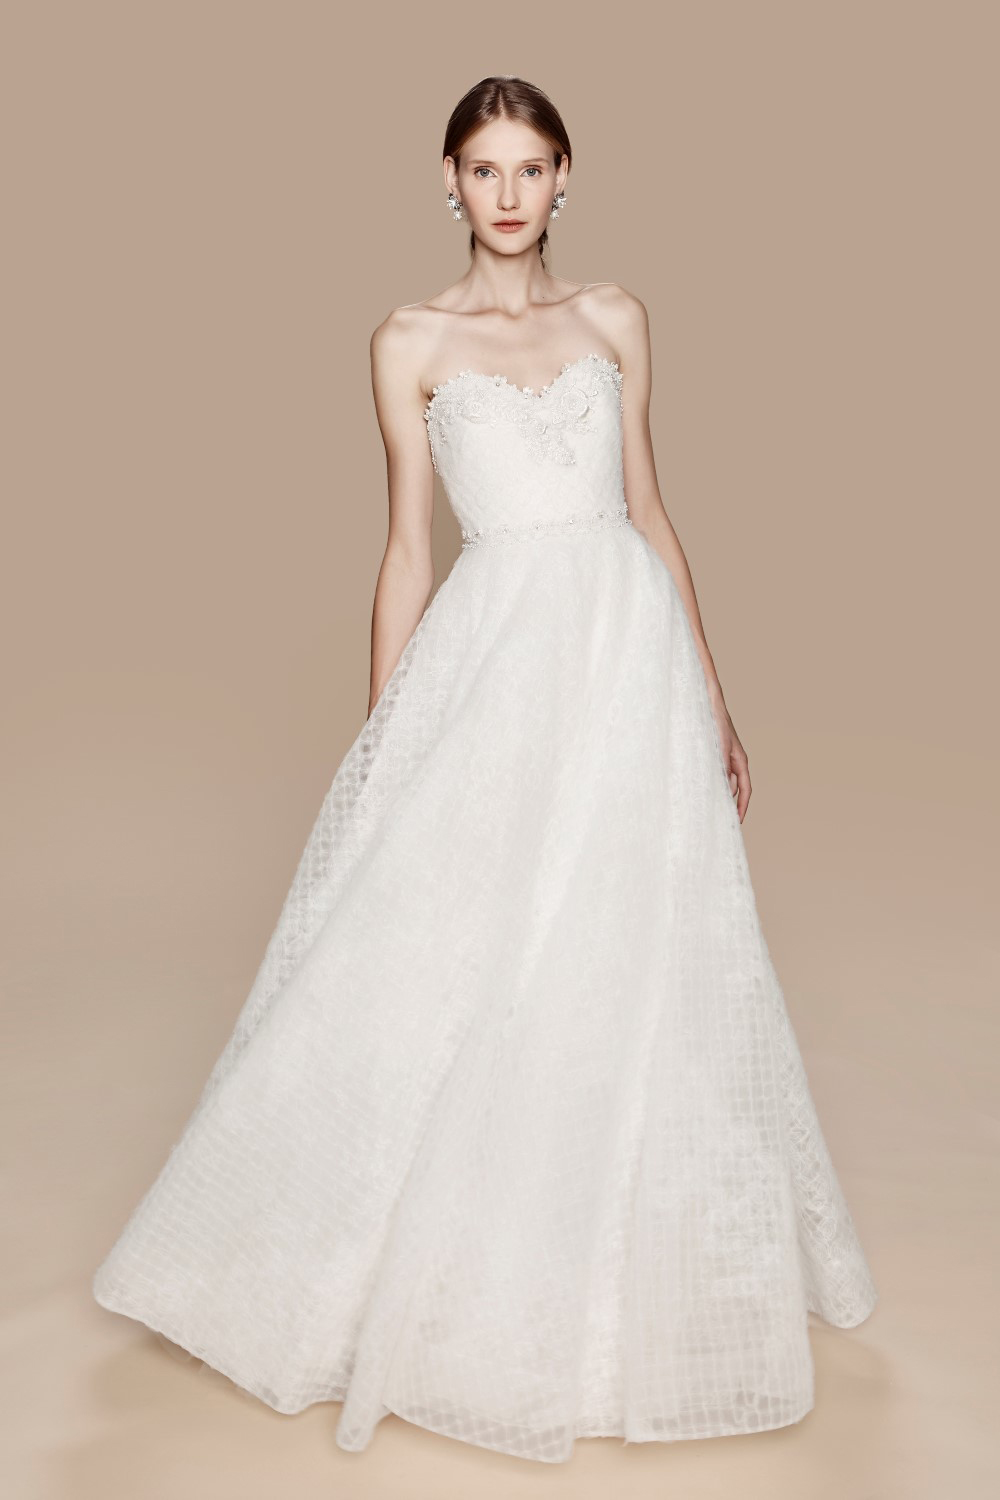 Marchesa Notte Fall 2017 Bridal Collection. www.theweddingnotebook.com